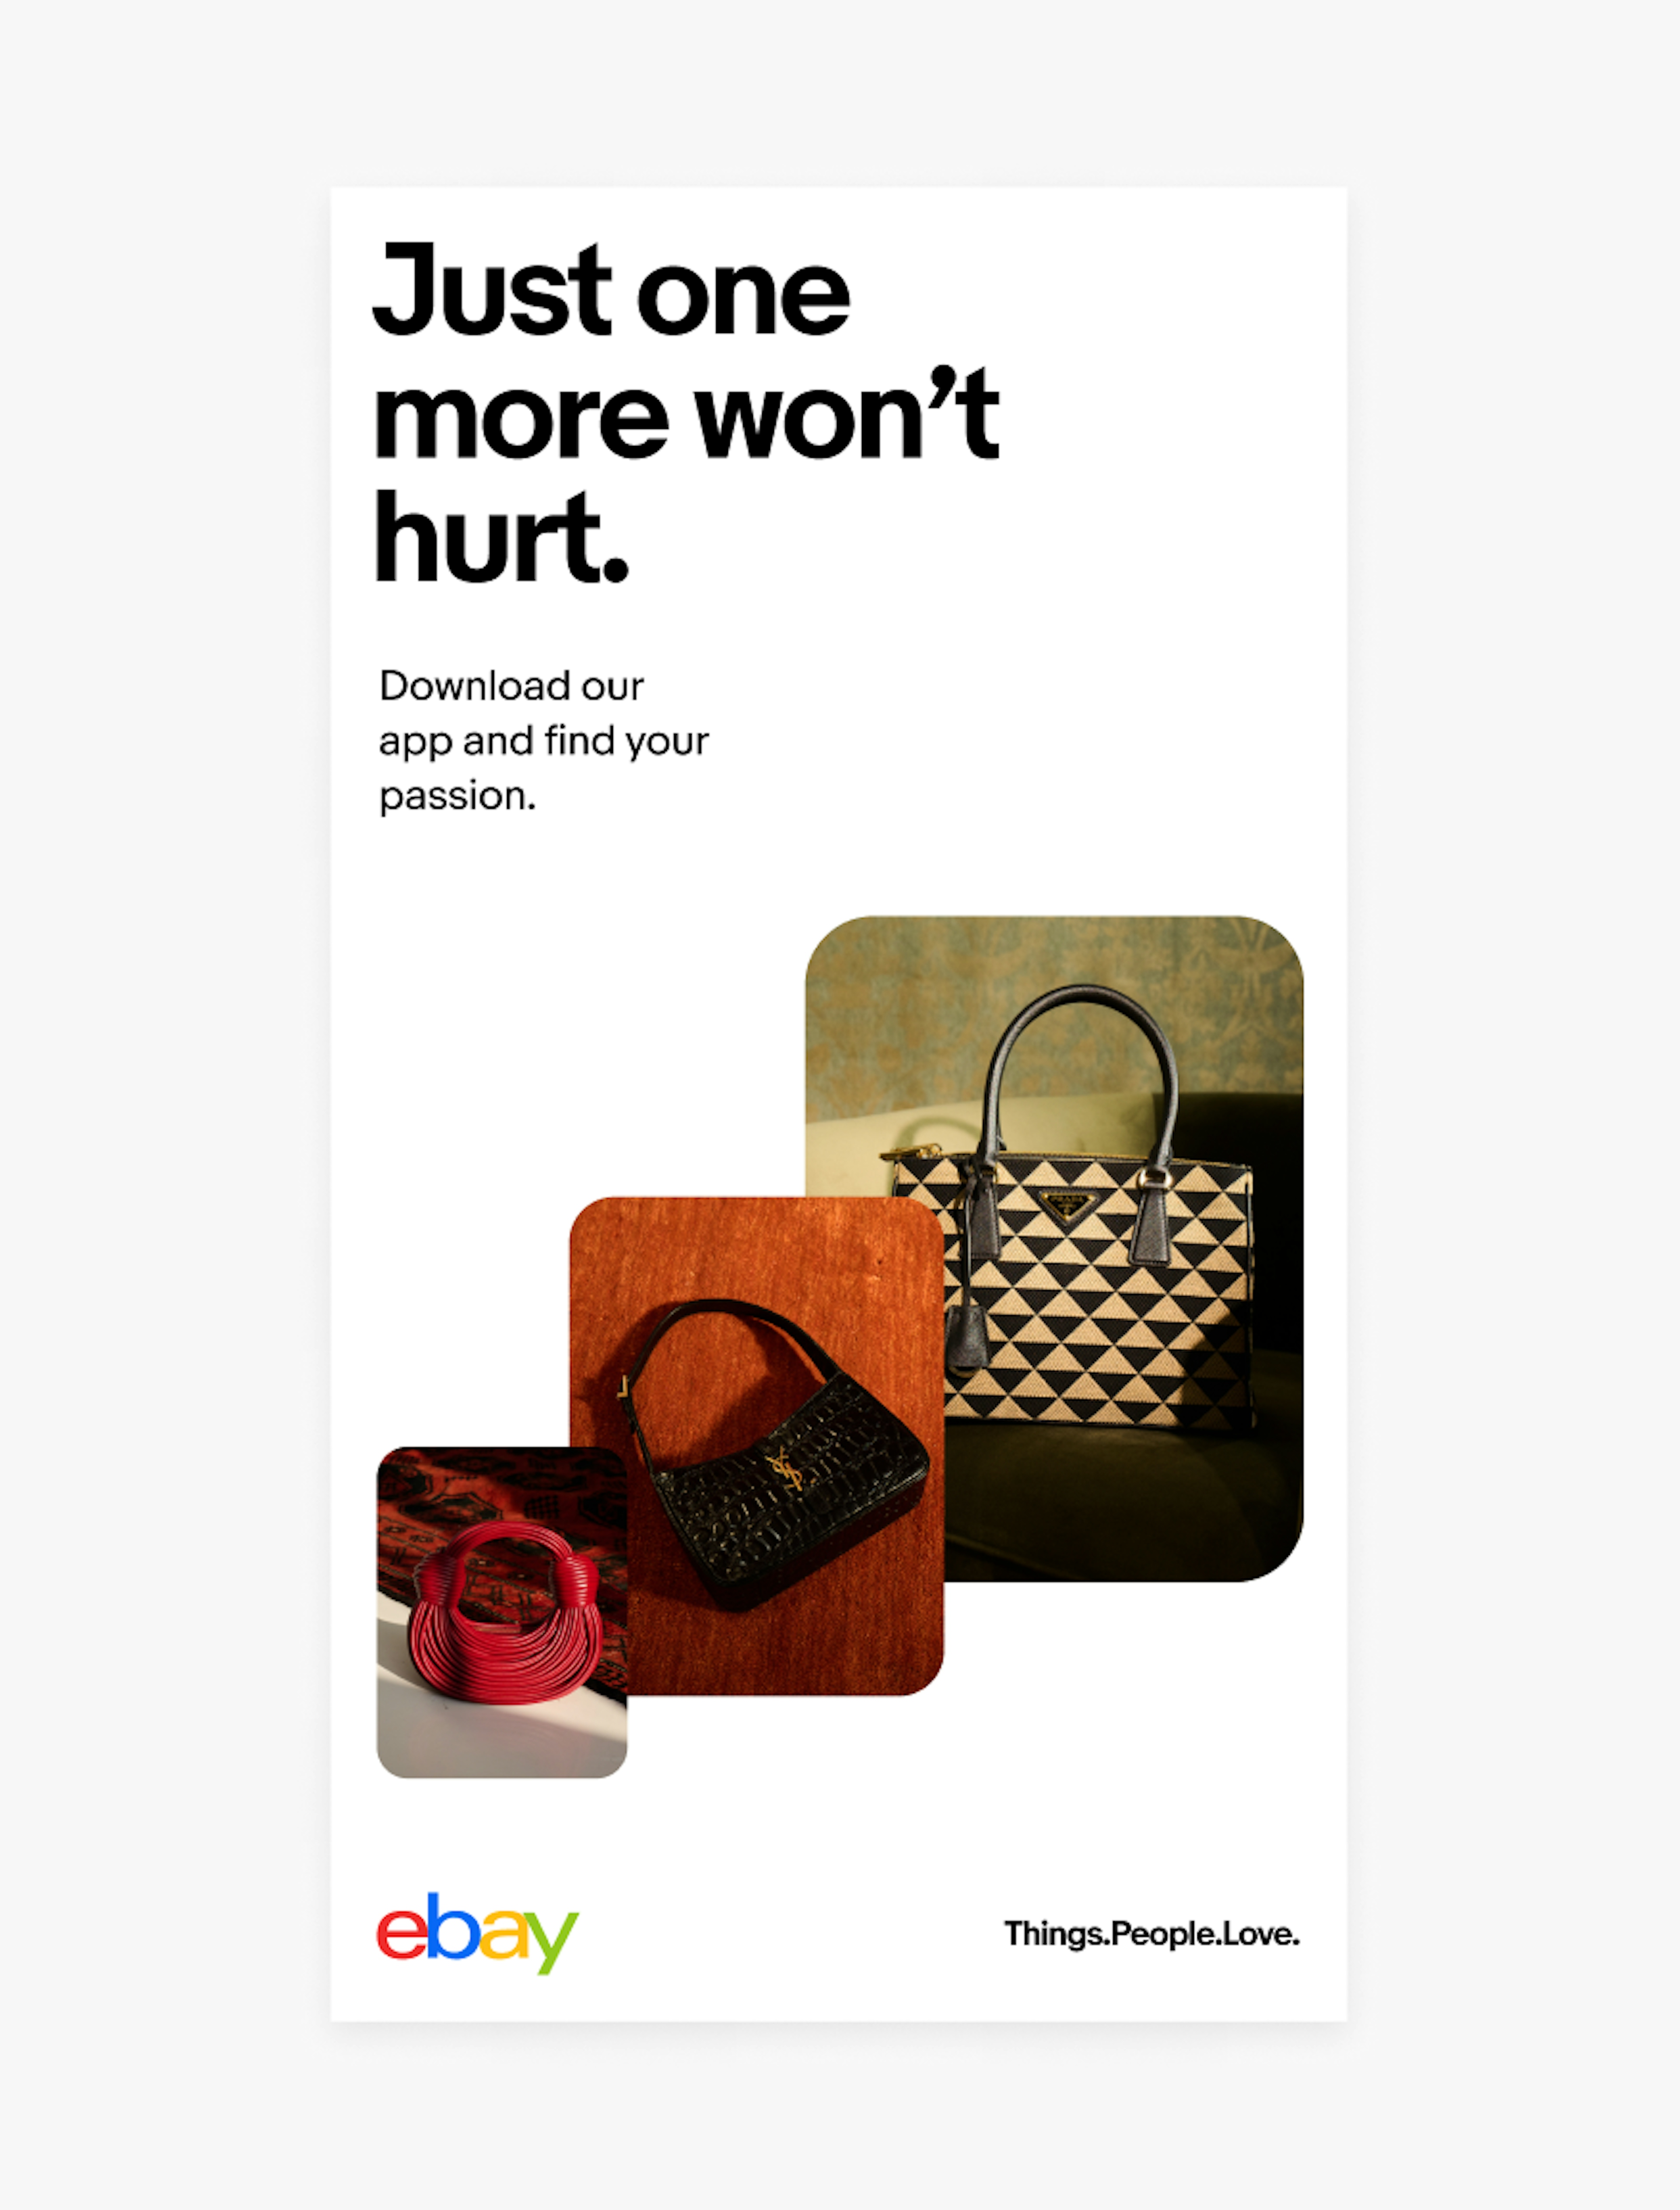 A vertical white layout with a headline “Just one more won’t hurt.” Followed by sub-copy “Download our app and find your passion.” A stack of 3 images move from bottom left to upper right and are all of handbags. The eBay logo is in the bottom left and “Things.People.Love.” is in the bottom right.